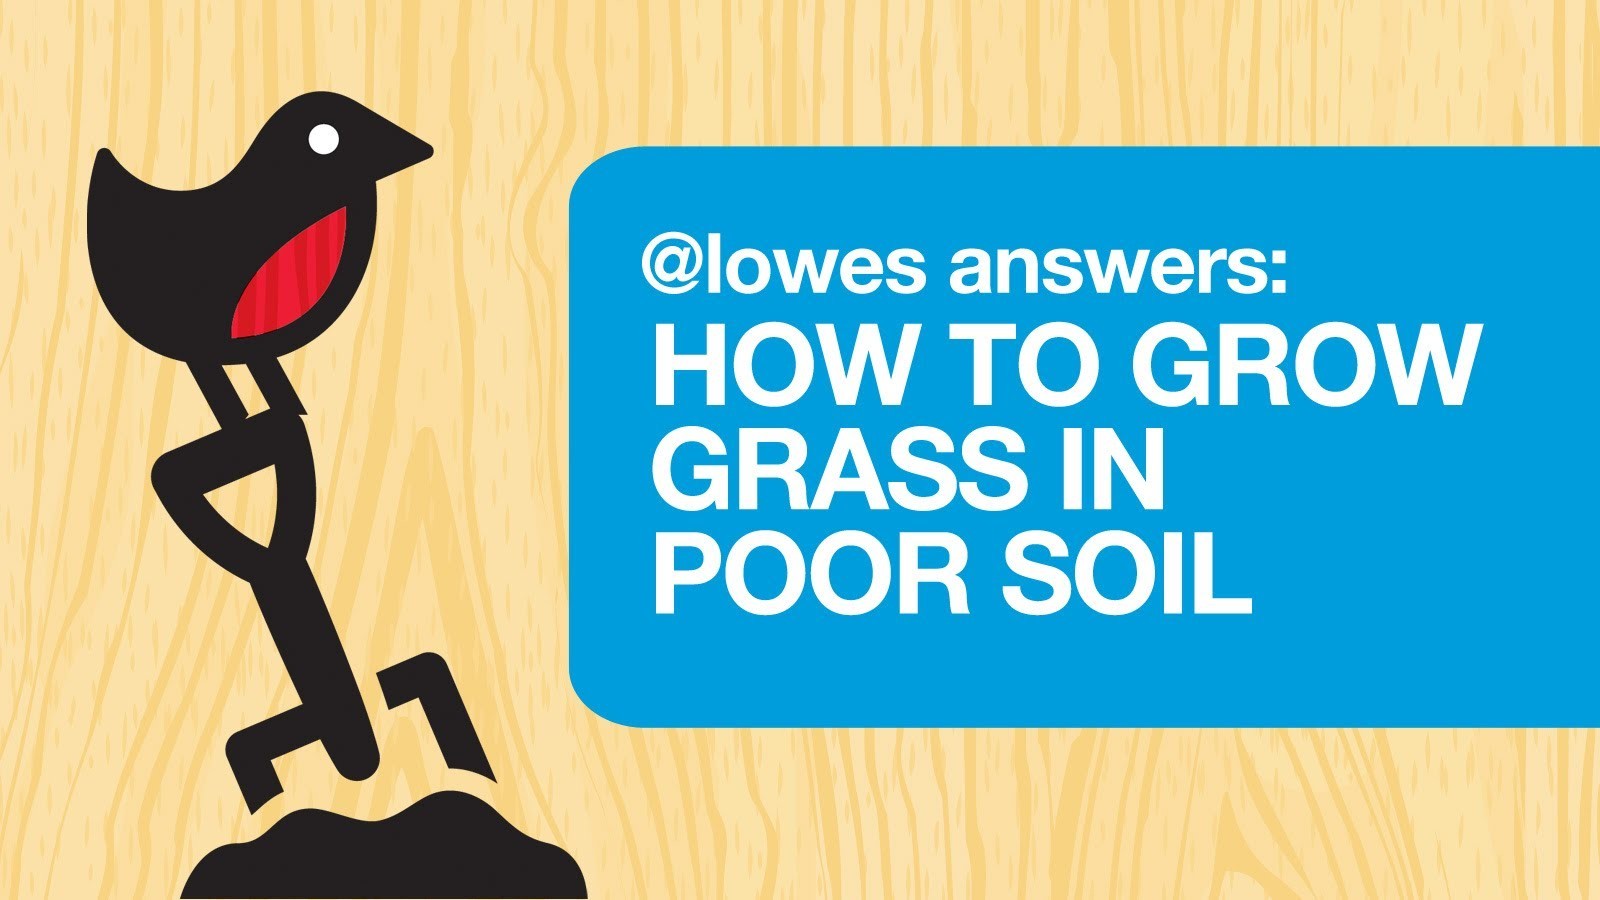 How To Grow Grass In Poor Soil